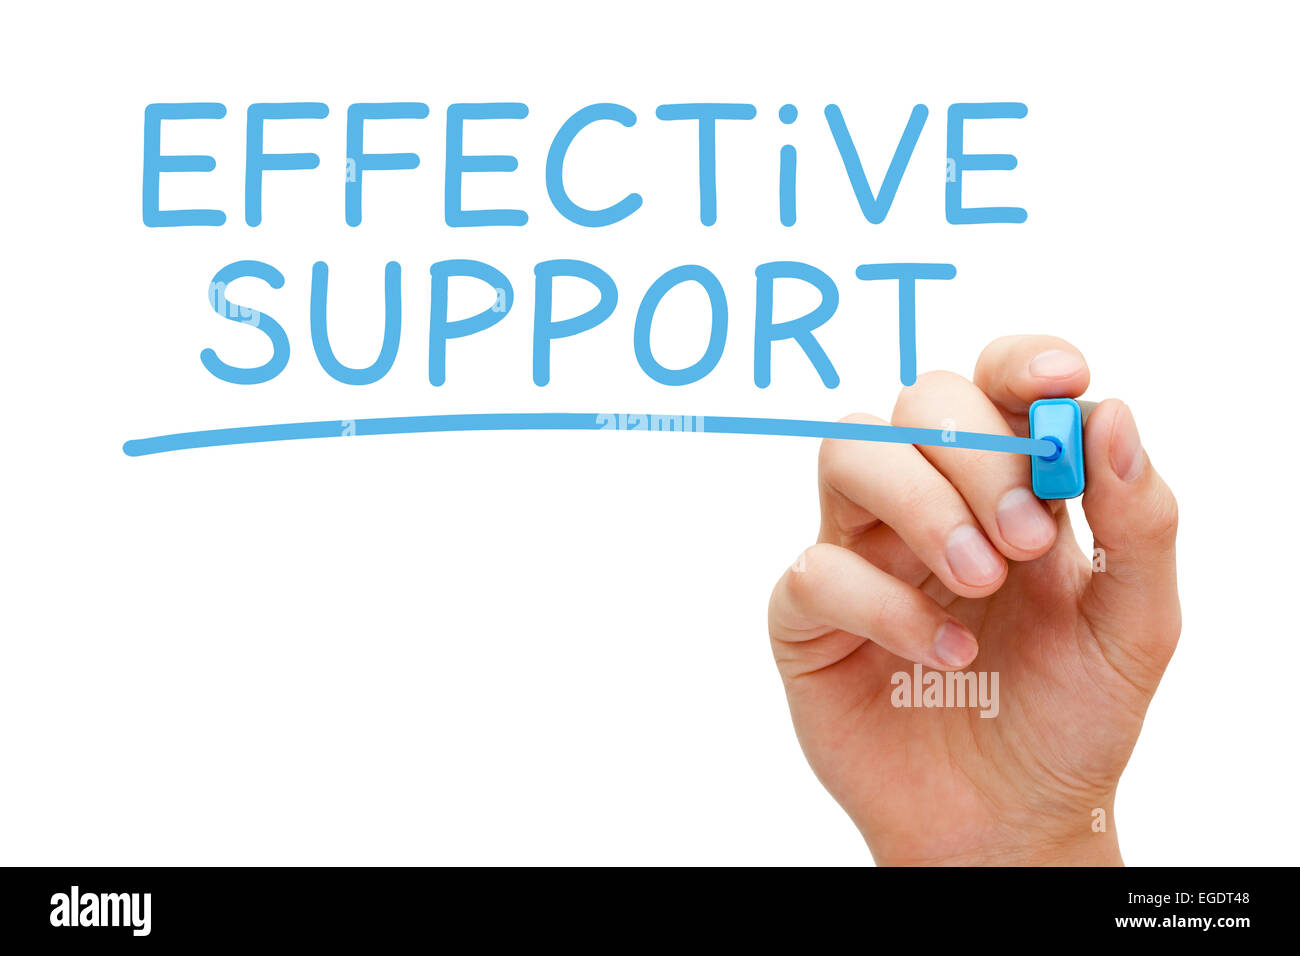 Hand writing Effective Support with blue marker on transparent wipe board. Stock Photo